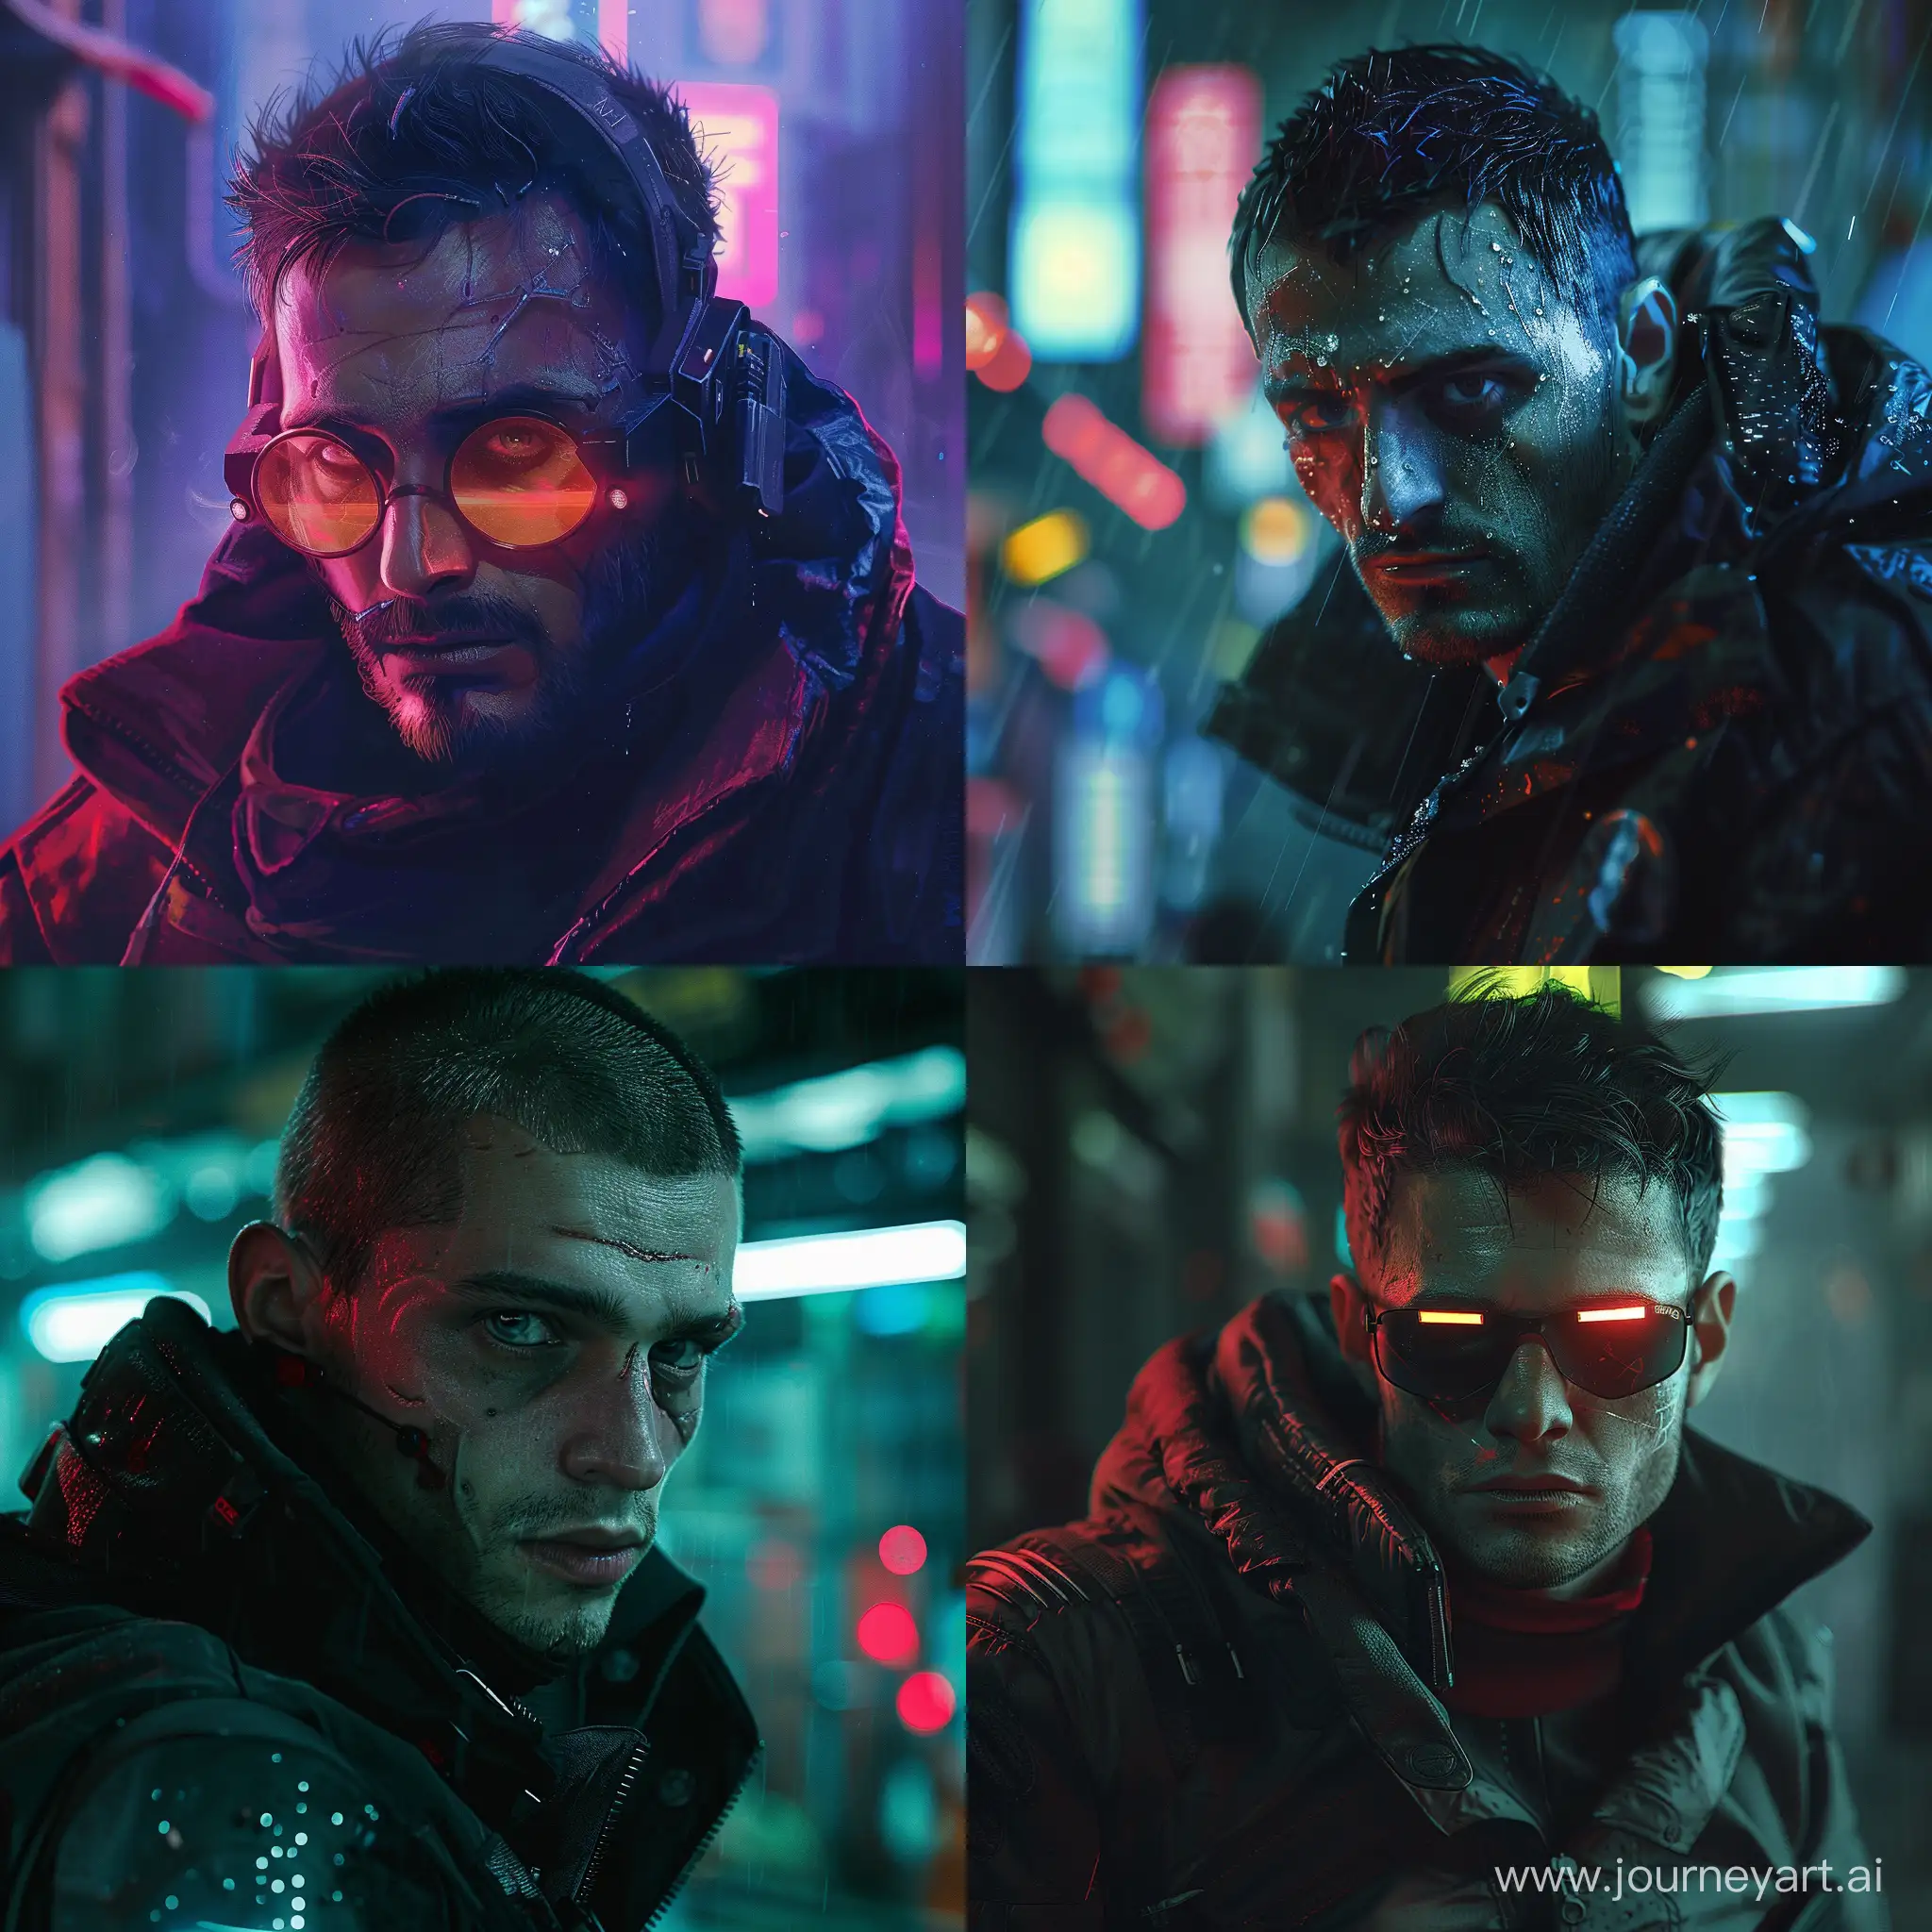 Danil Bagrov from the movie "brother" in the style of the cyberpunk game